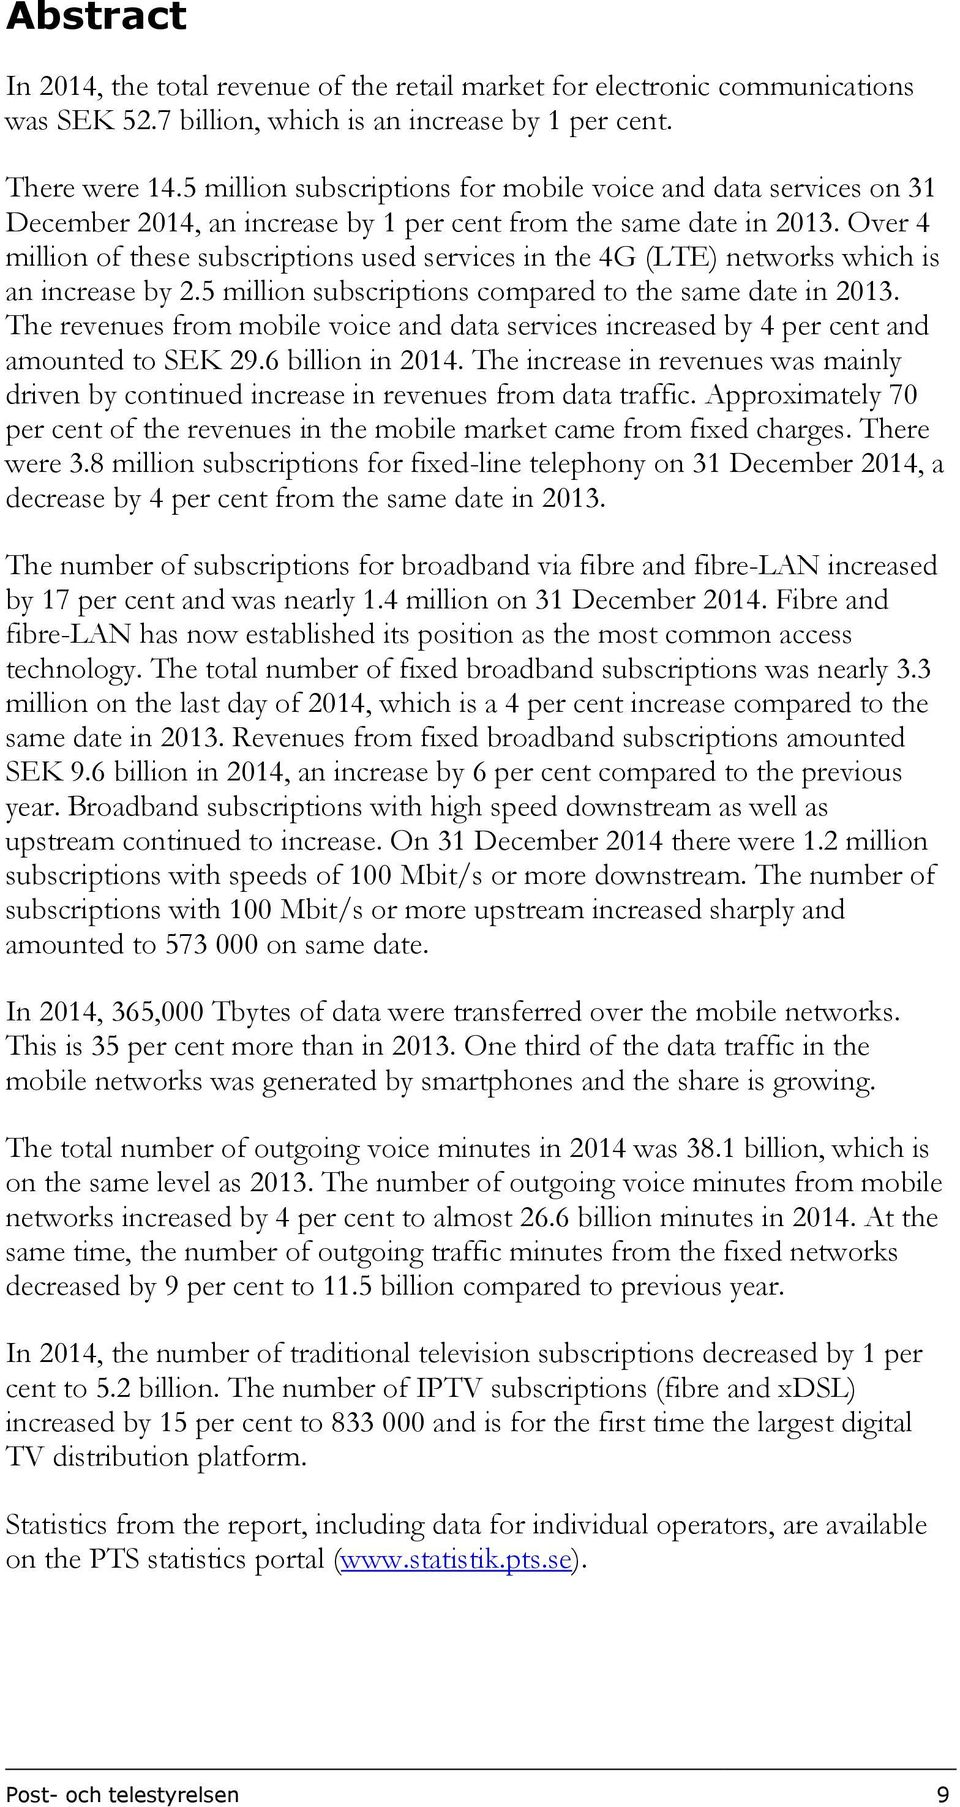 Over 4 million of these subscriptions used services in the 4G (LTE) networks which is an increase by 2.5 million subscriptions compared to the same date in 2013.